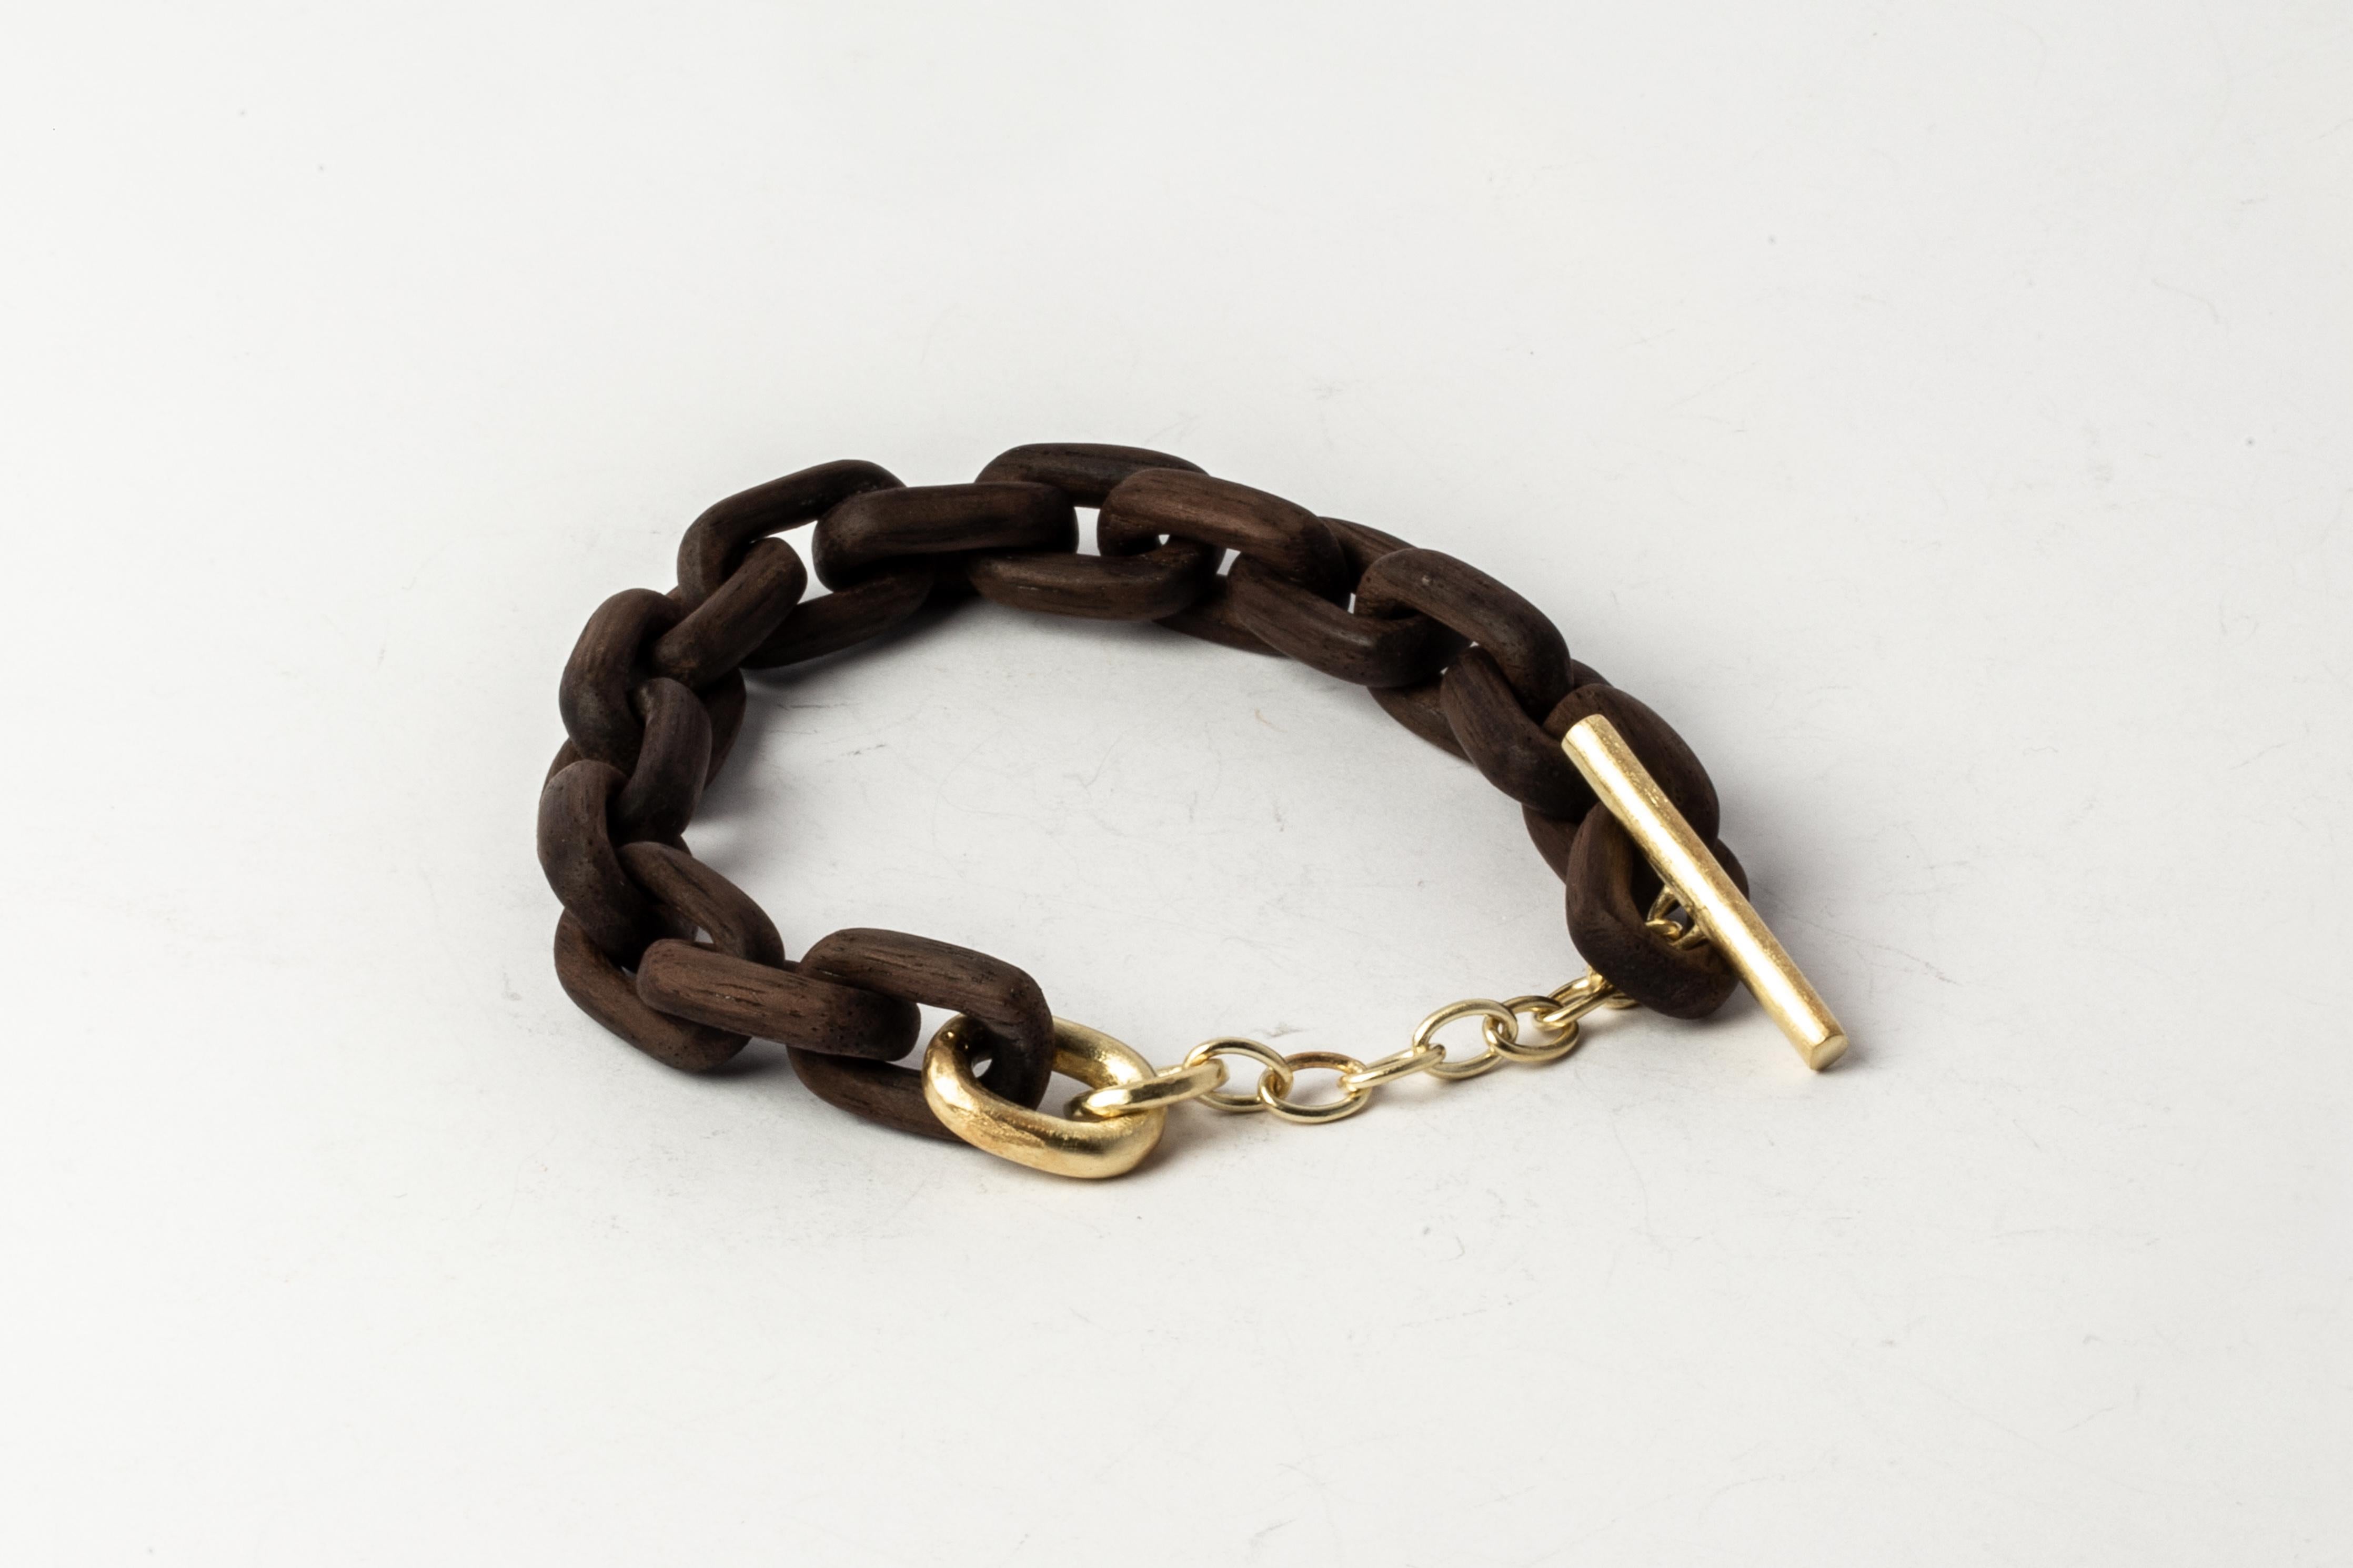 Bracelet in brown rosewood and acid treated gold plated brass. All organic chain is carved by hand. In the case of the chains made of wood ; carved from a single long slab of wood (see link). Chains made from wood is modeled and constructed into